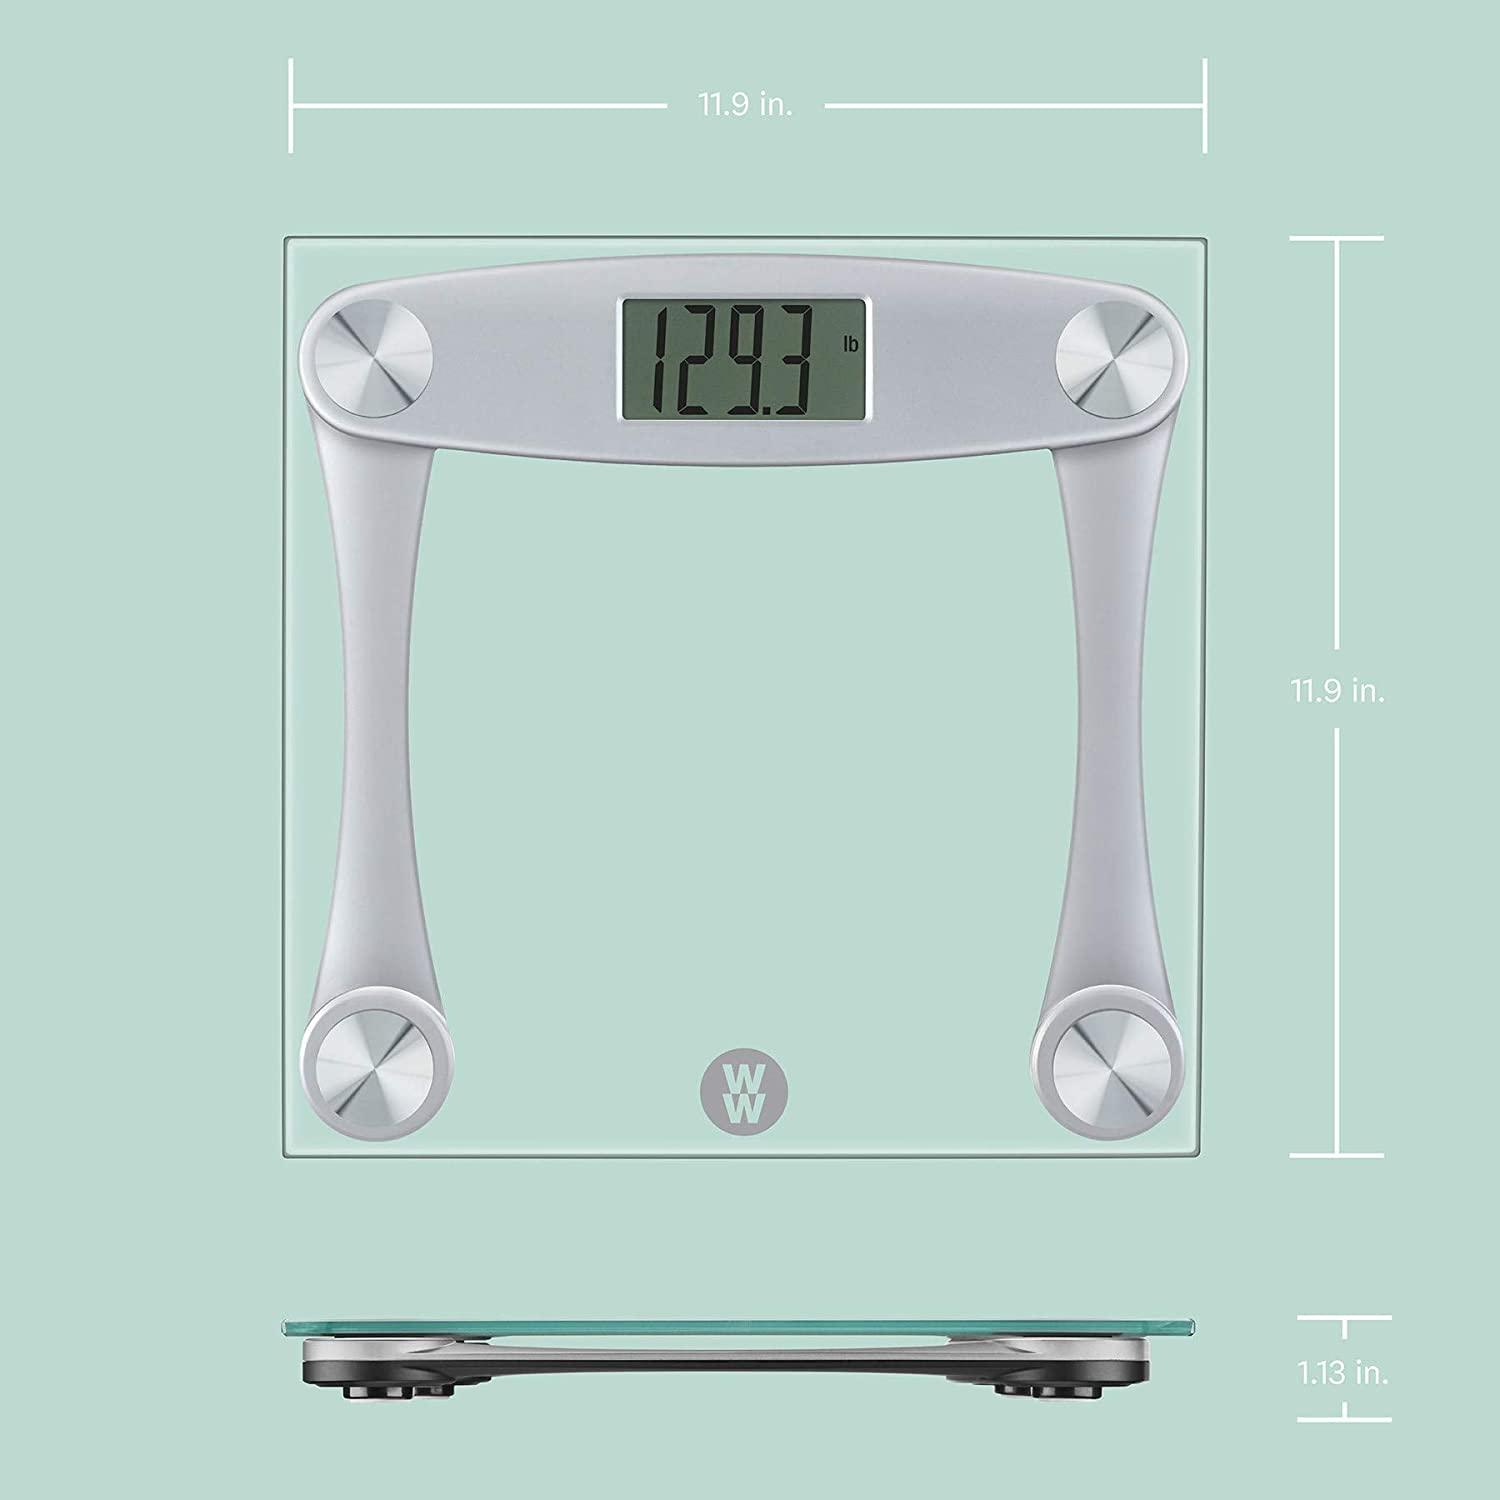 Weight Watchers by Conair Scales by Conair Digital Glass Bathroom